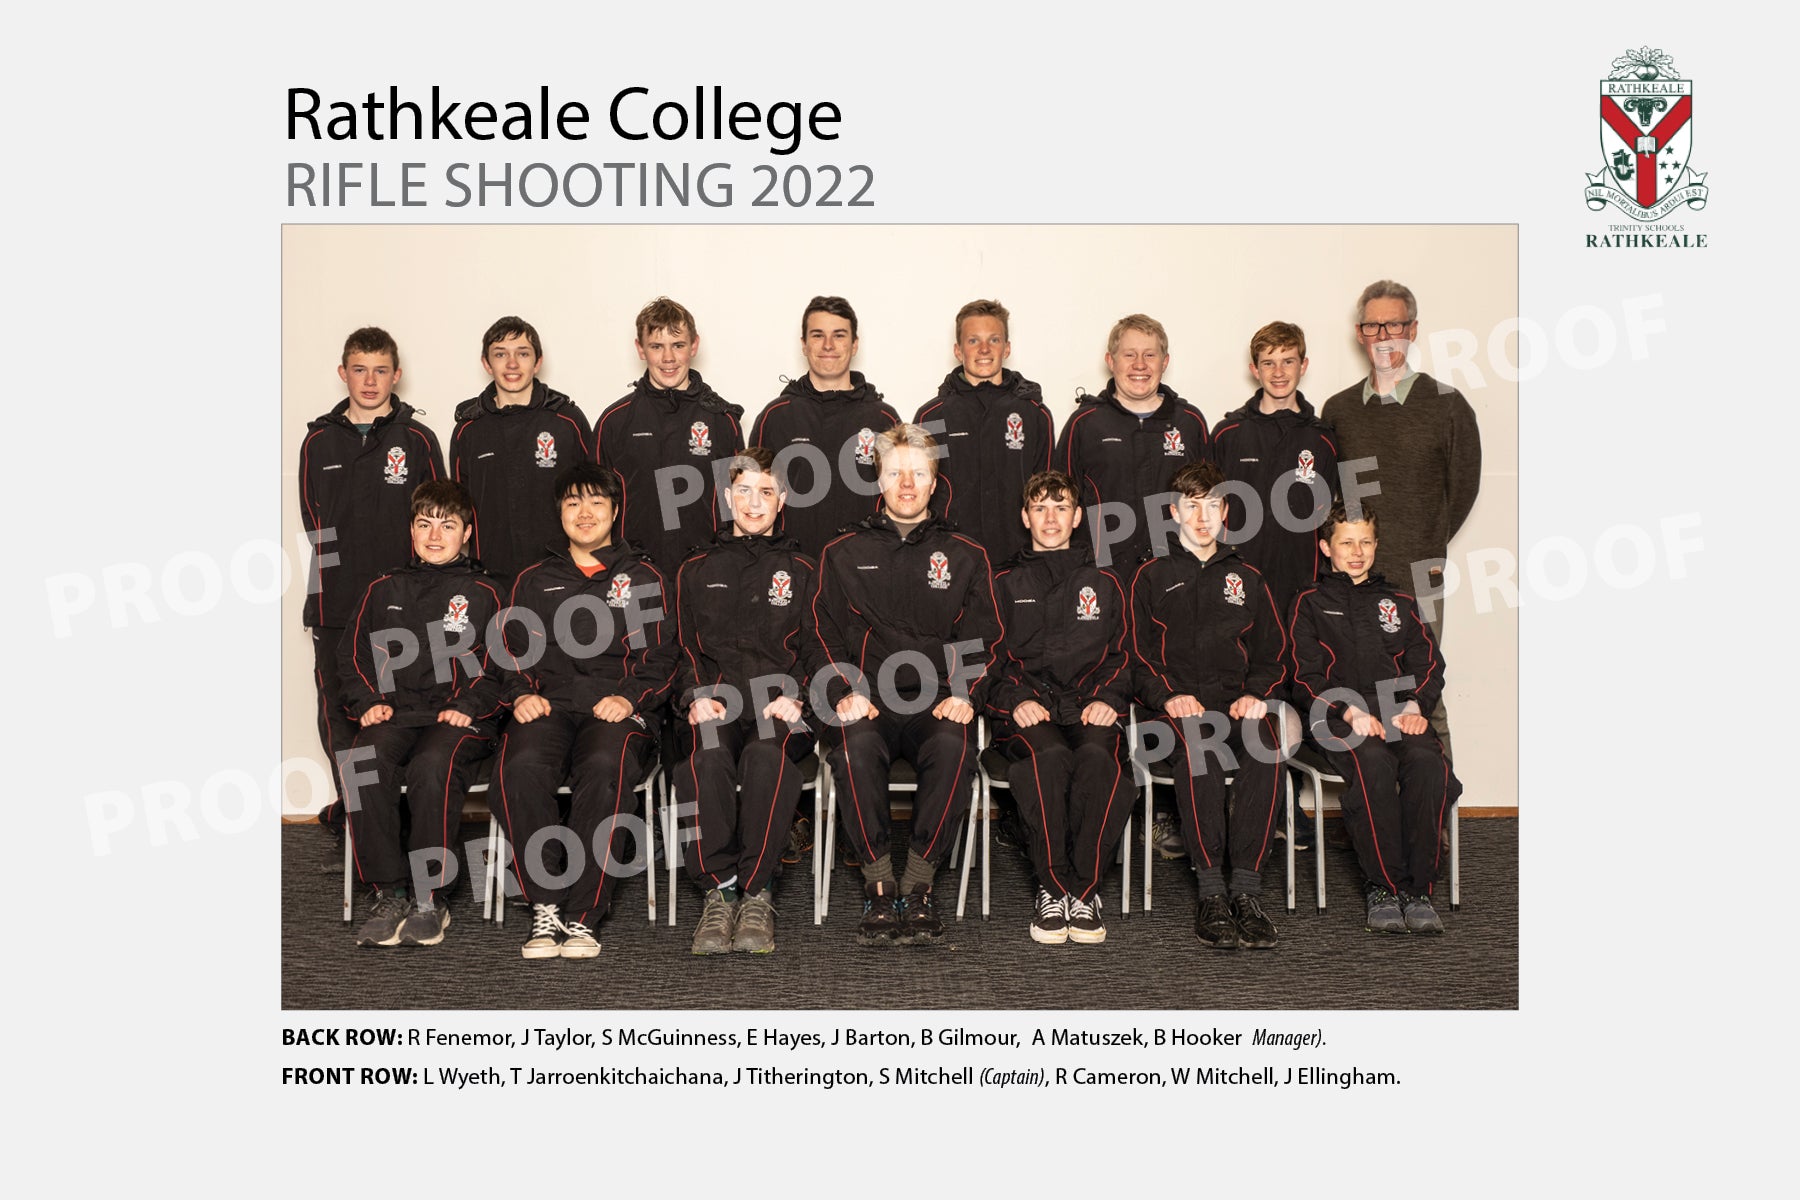 Rifle Shooting - Rathkeale College 2022